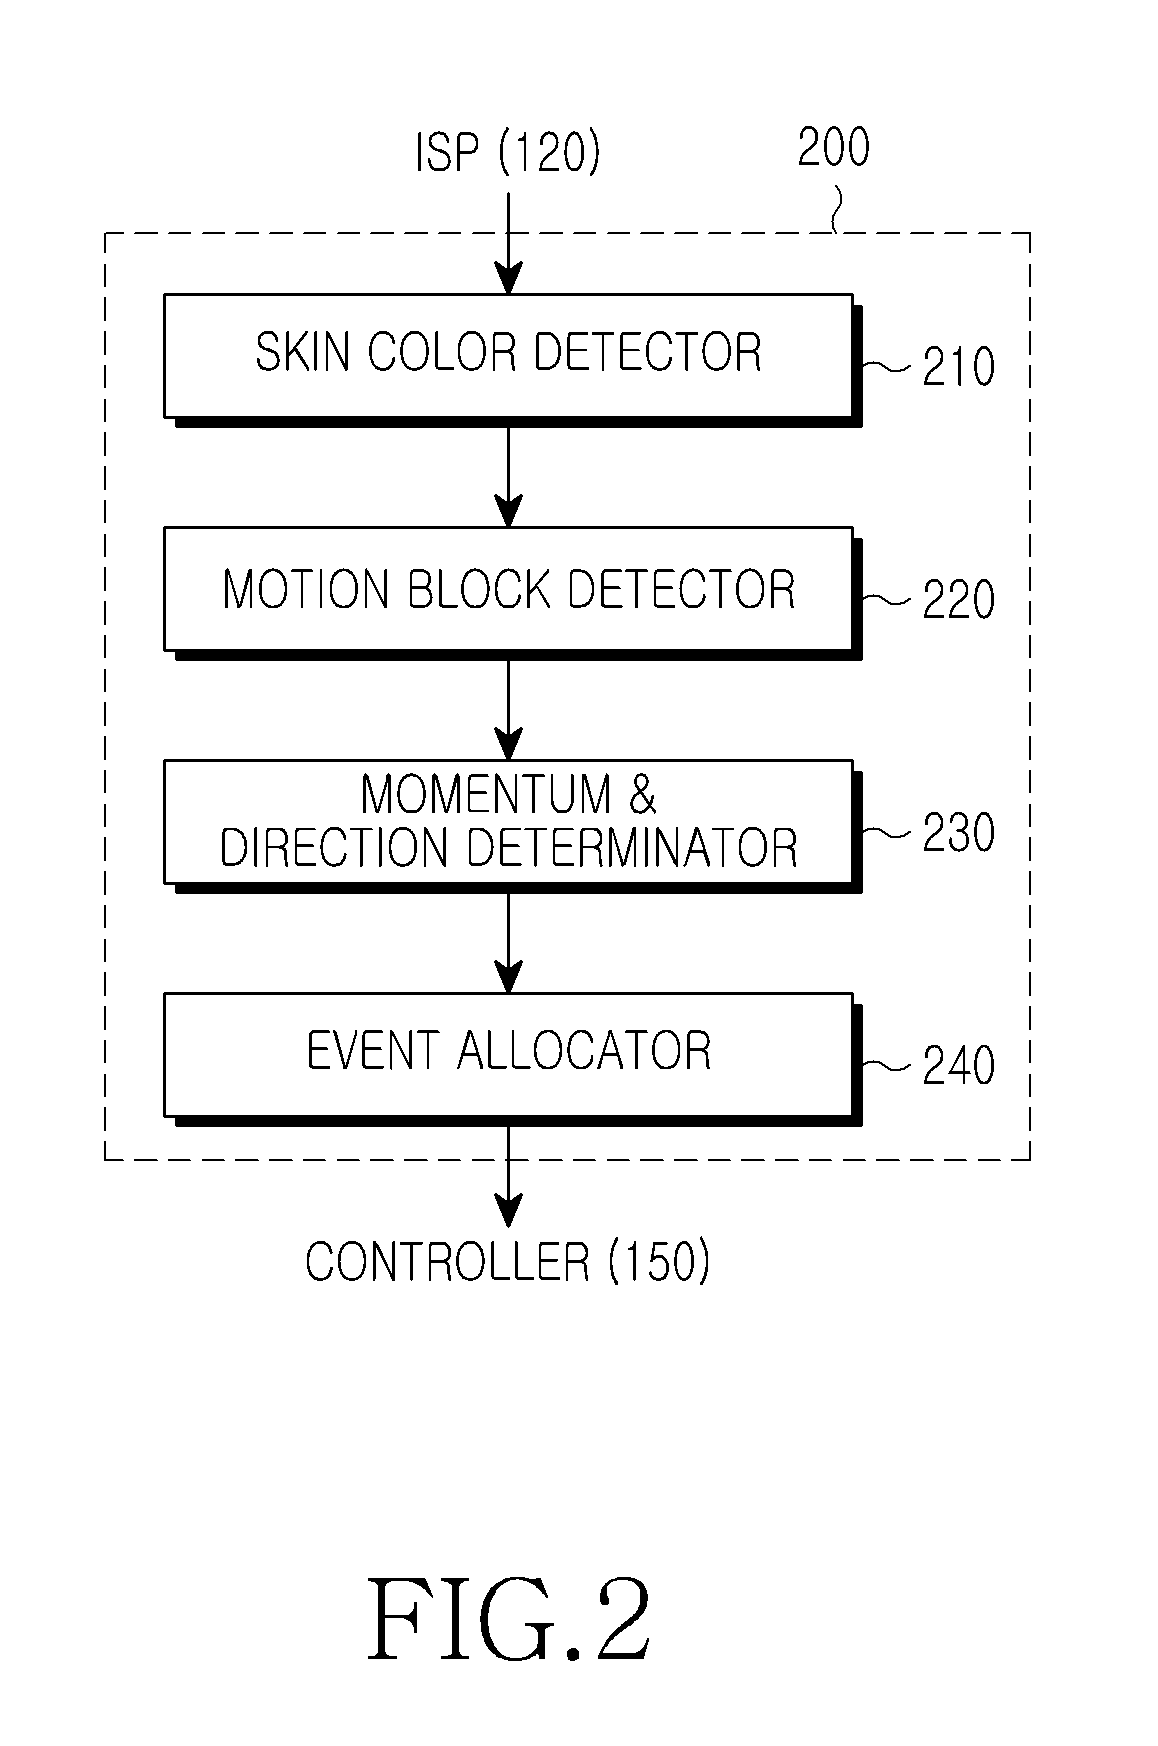 Apparatus and method for recognizing subject motion using a camera